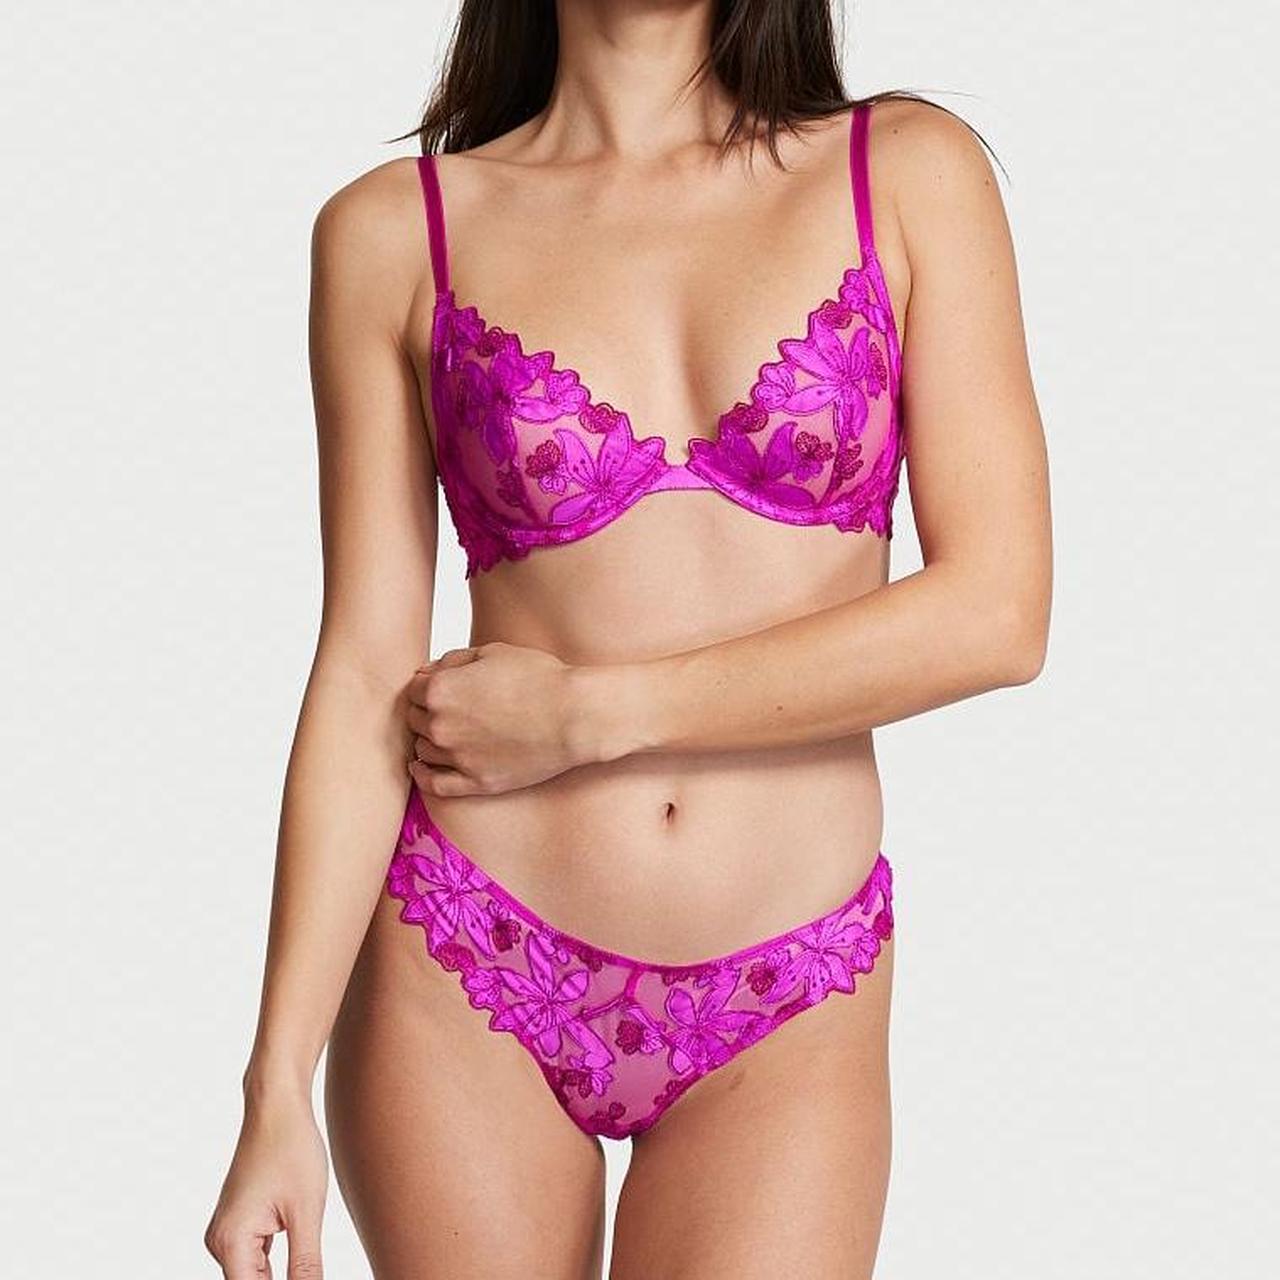 Ziggy Glam Floral Embroidery Unlined Demi Bra